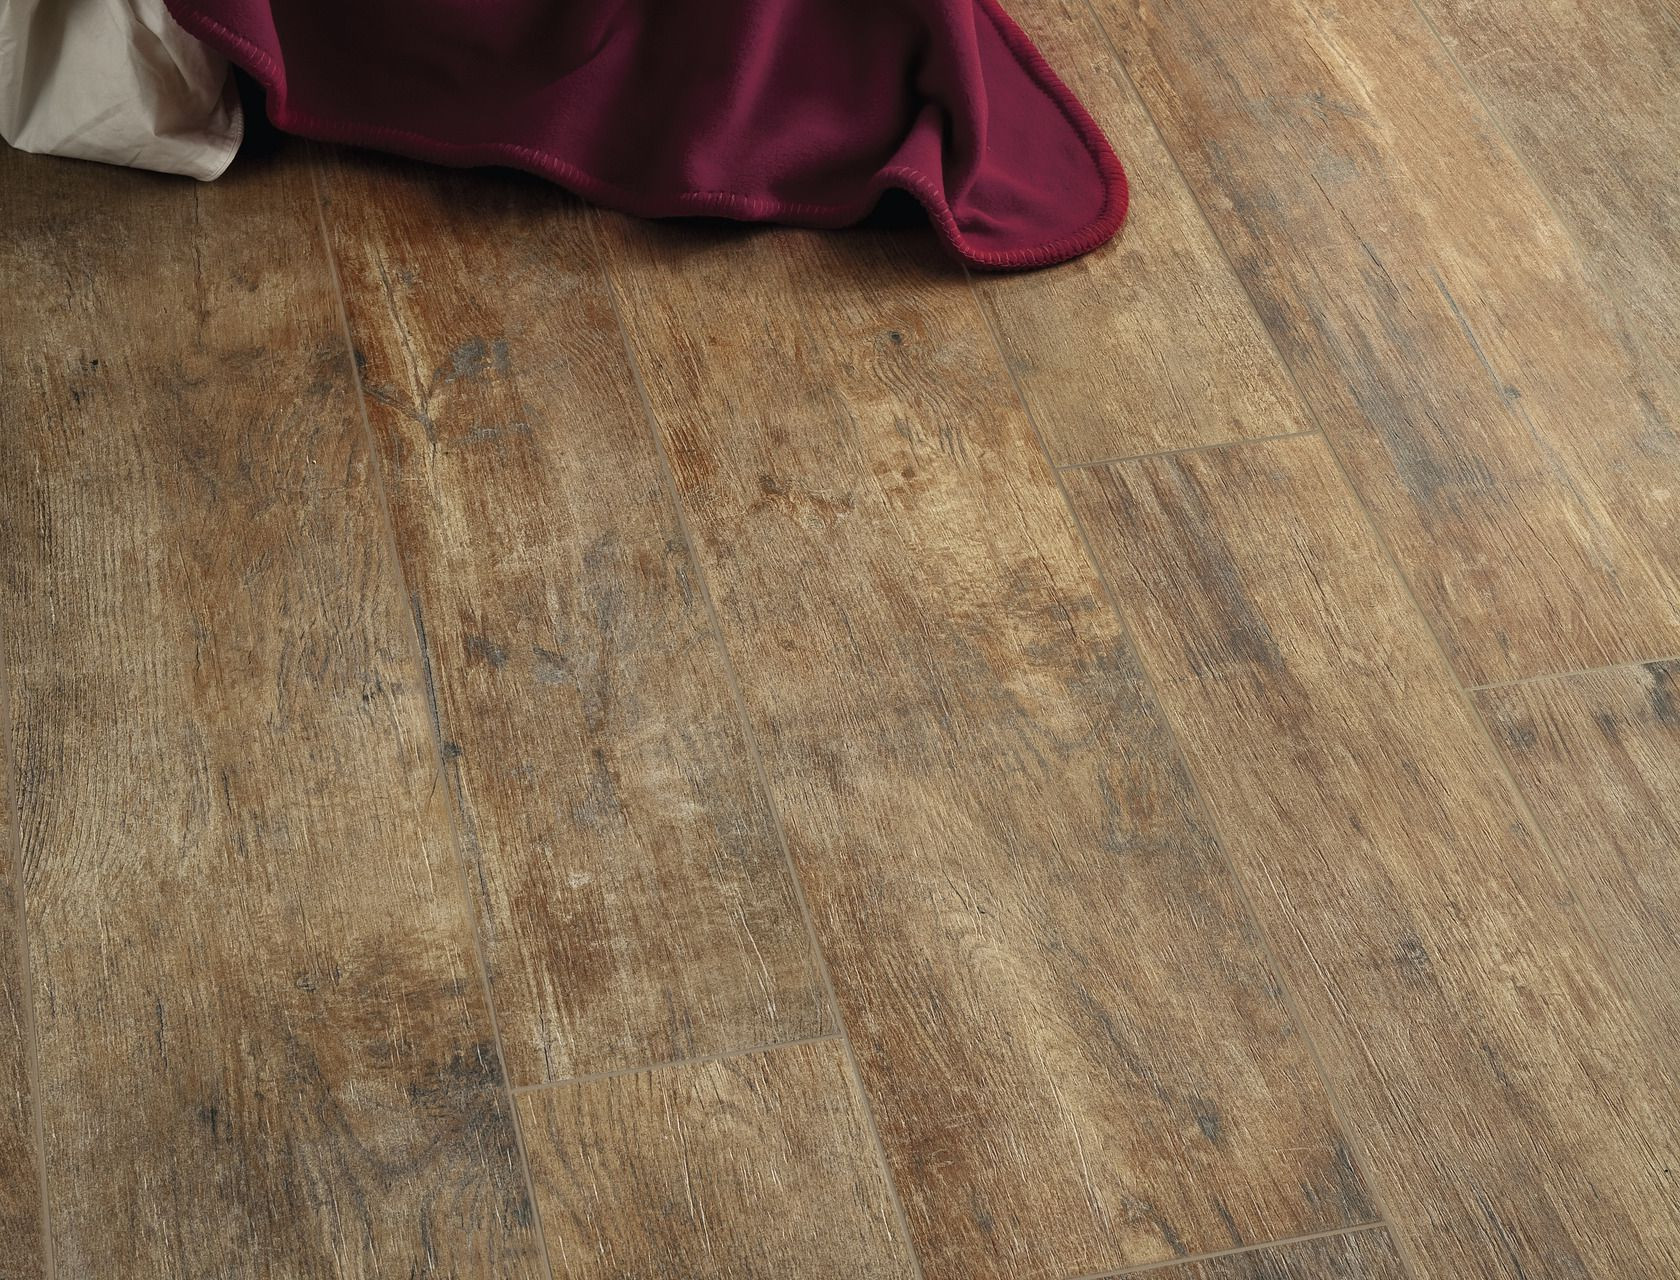 20 Great B and Q Hardwood Flooring 2024 free download b and q hardwood flooring of wood effect parquet floor and wall coverings porcelain stoneware regarding floor and wall coverings wood effect parquet